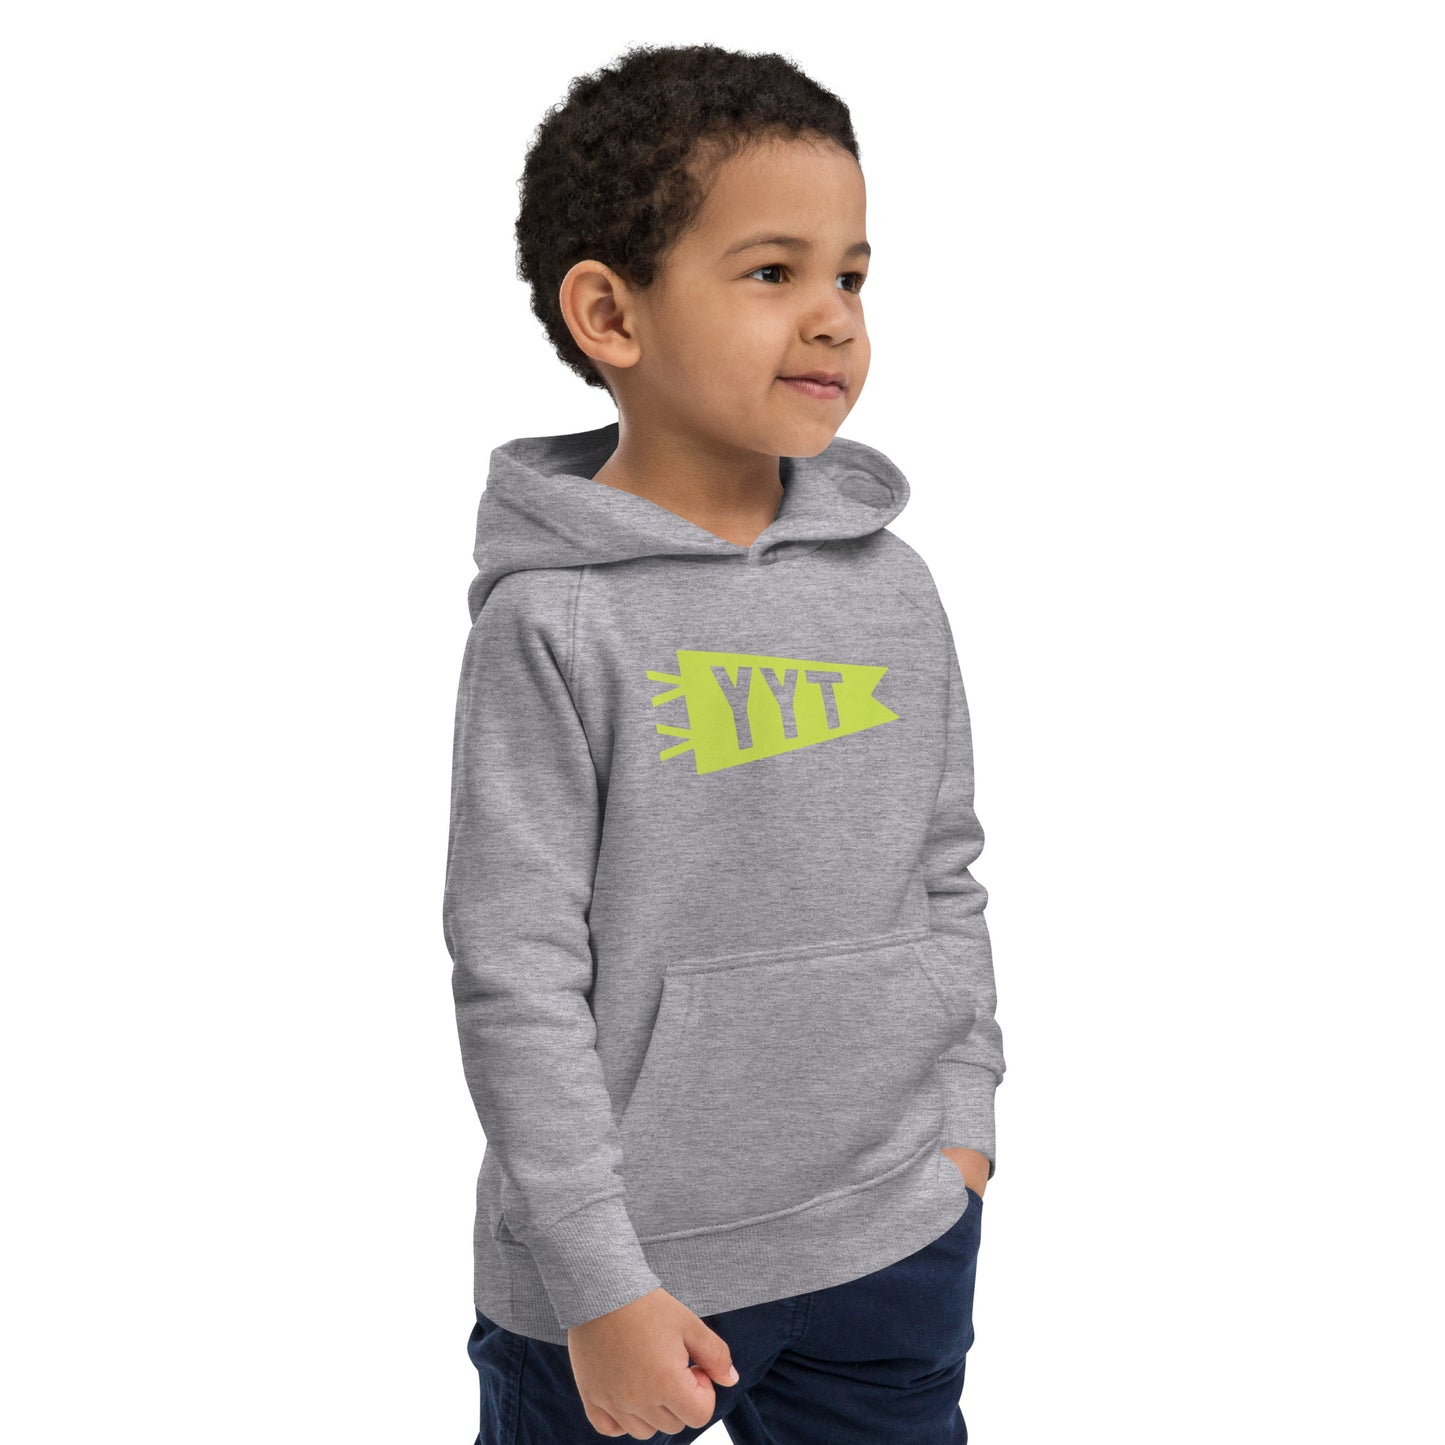 Kid's Sustainable Hoodie - Green Graphic • YYT St. John's • YHM Designs - Image 13